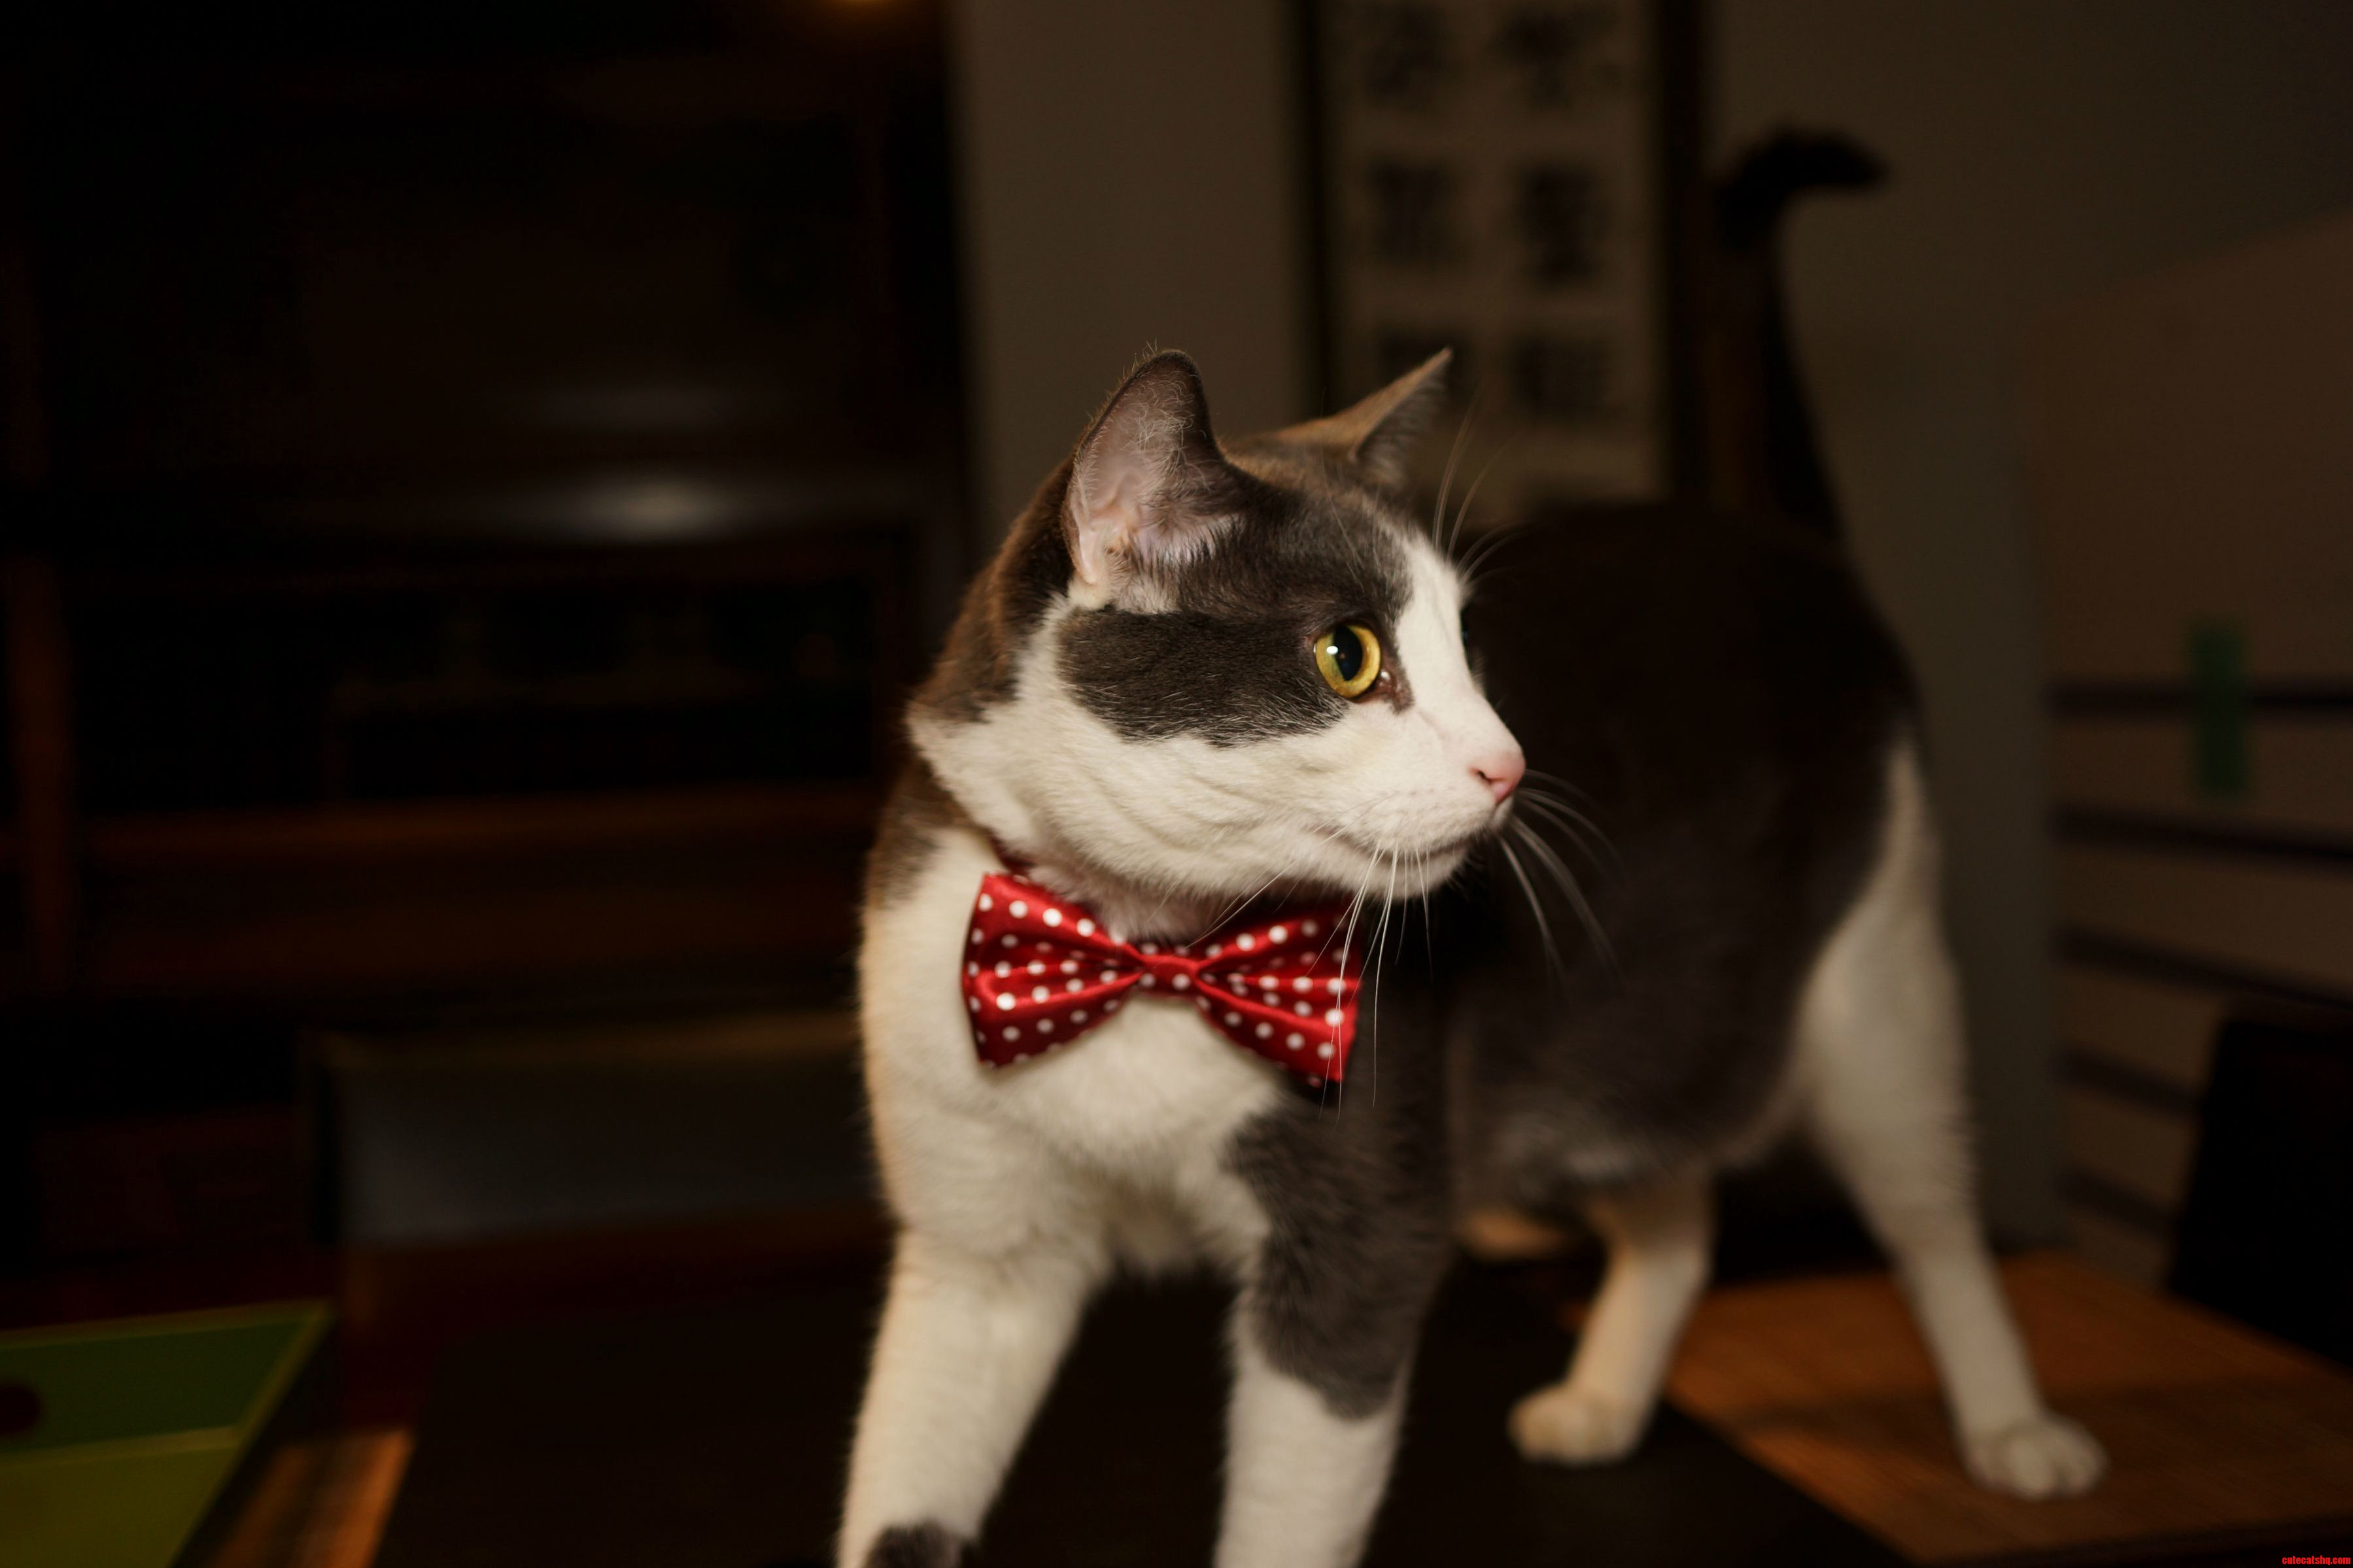 Peter is looking dapper in his valentines day bowtie